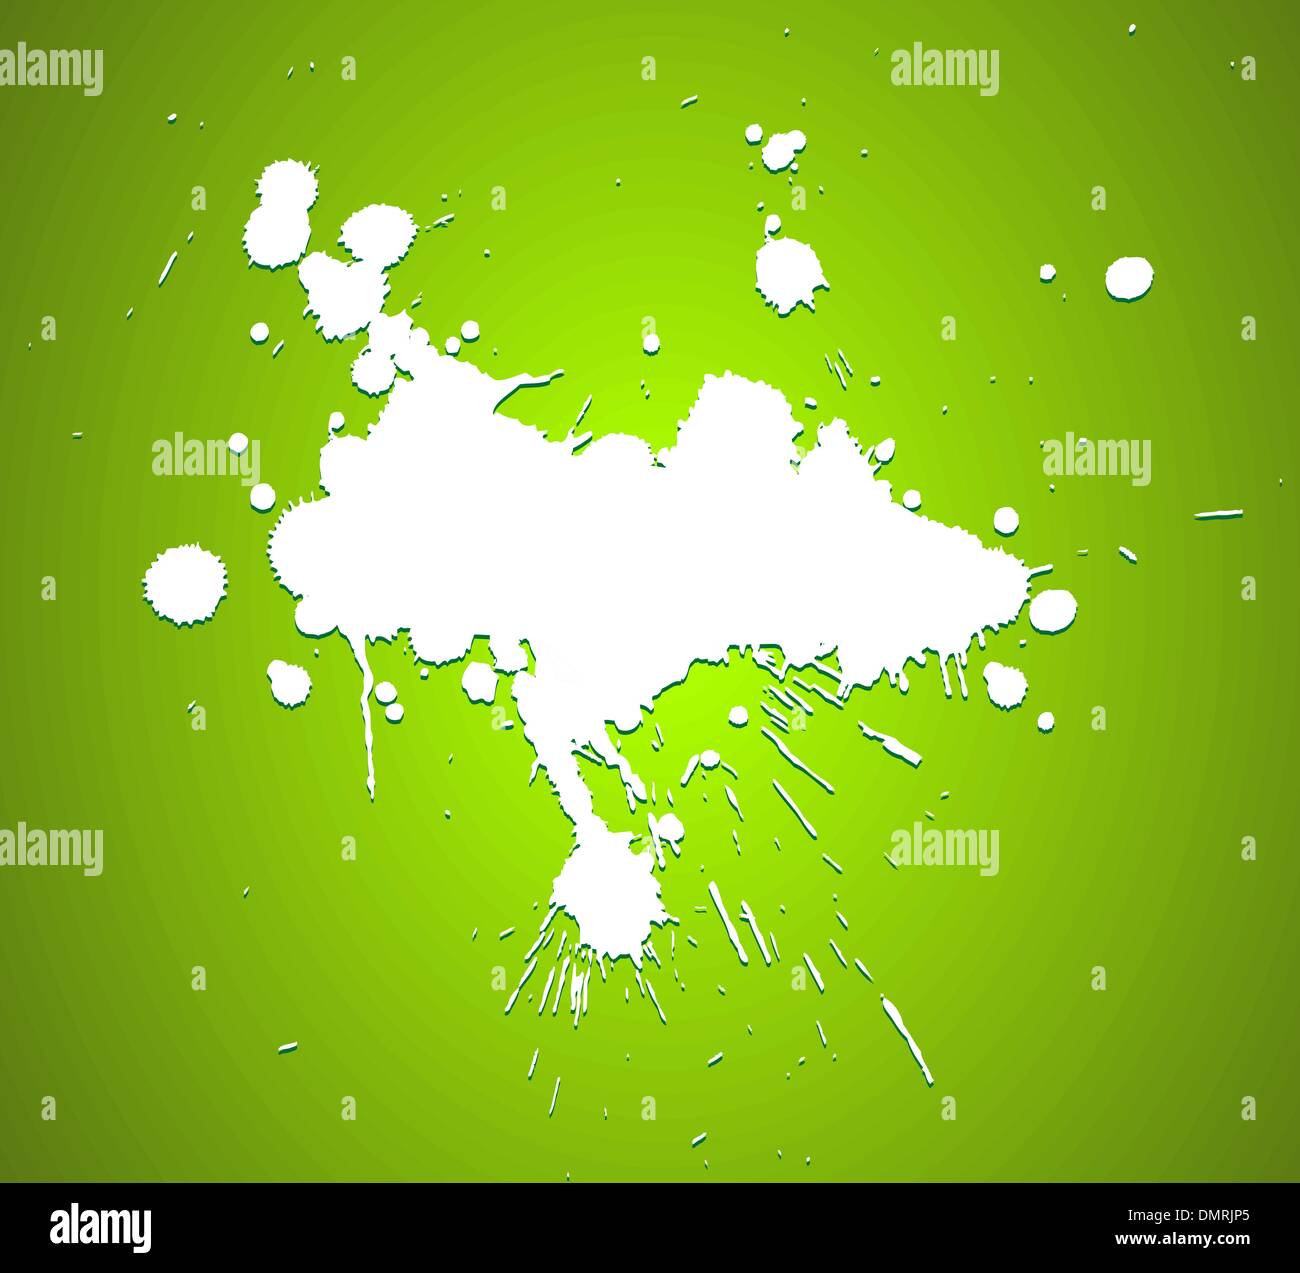 Grunge background with splats Stock Vector